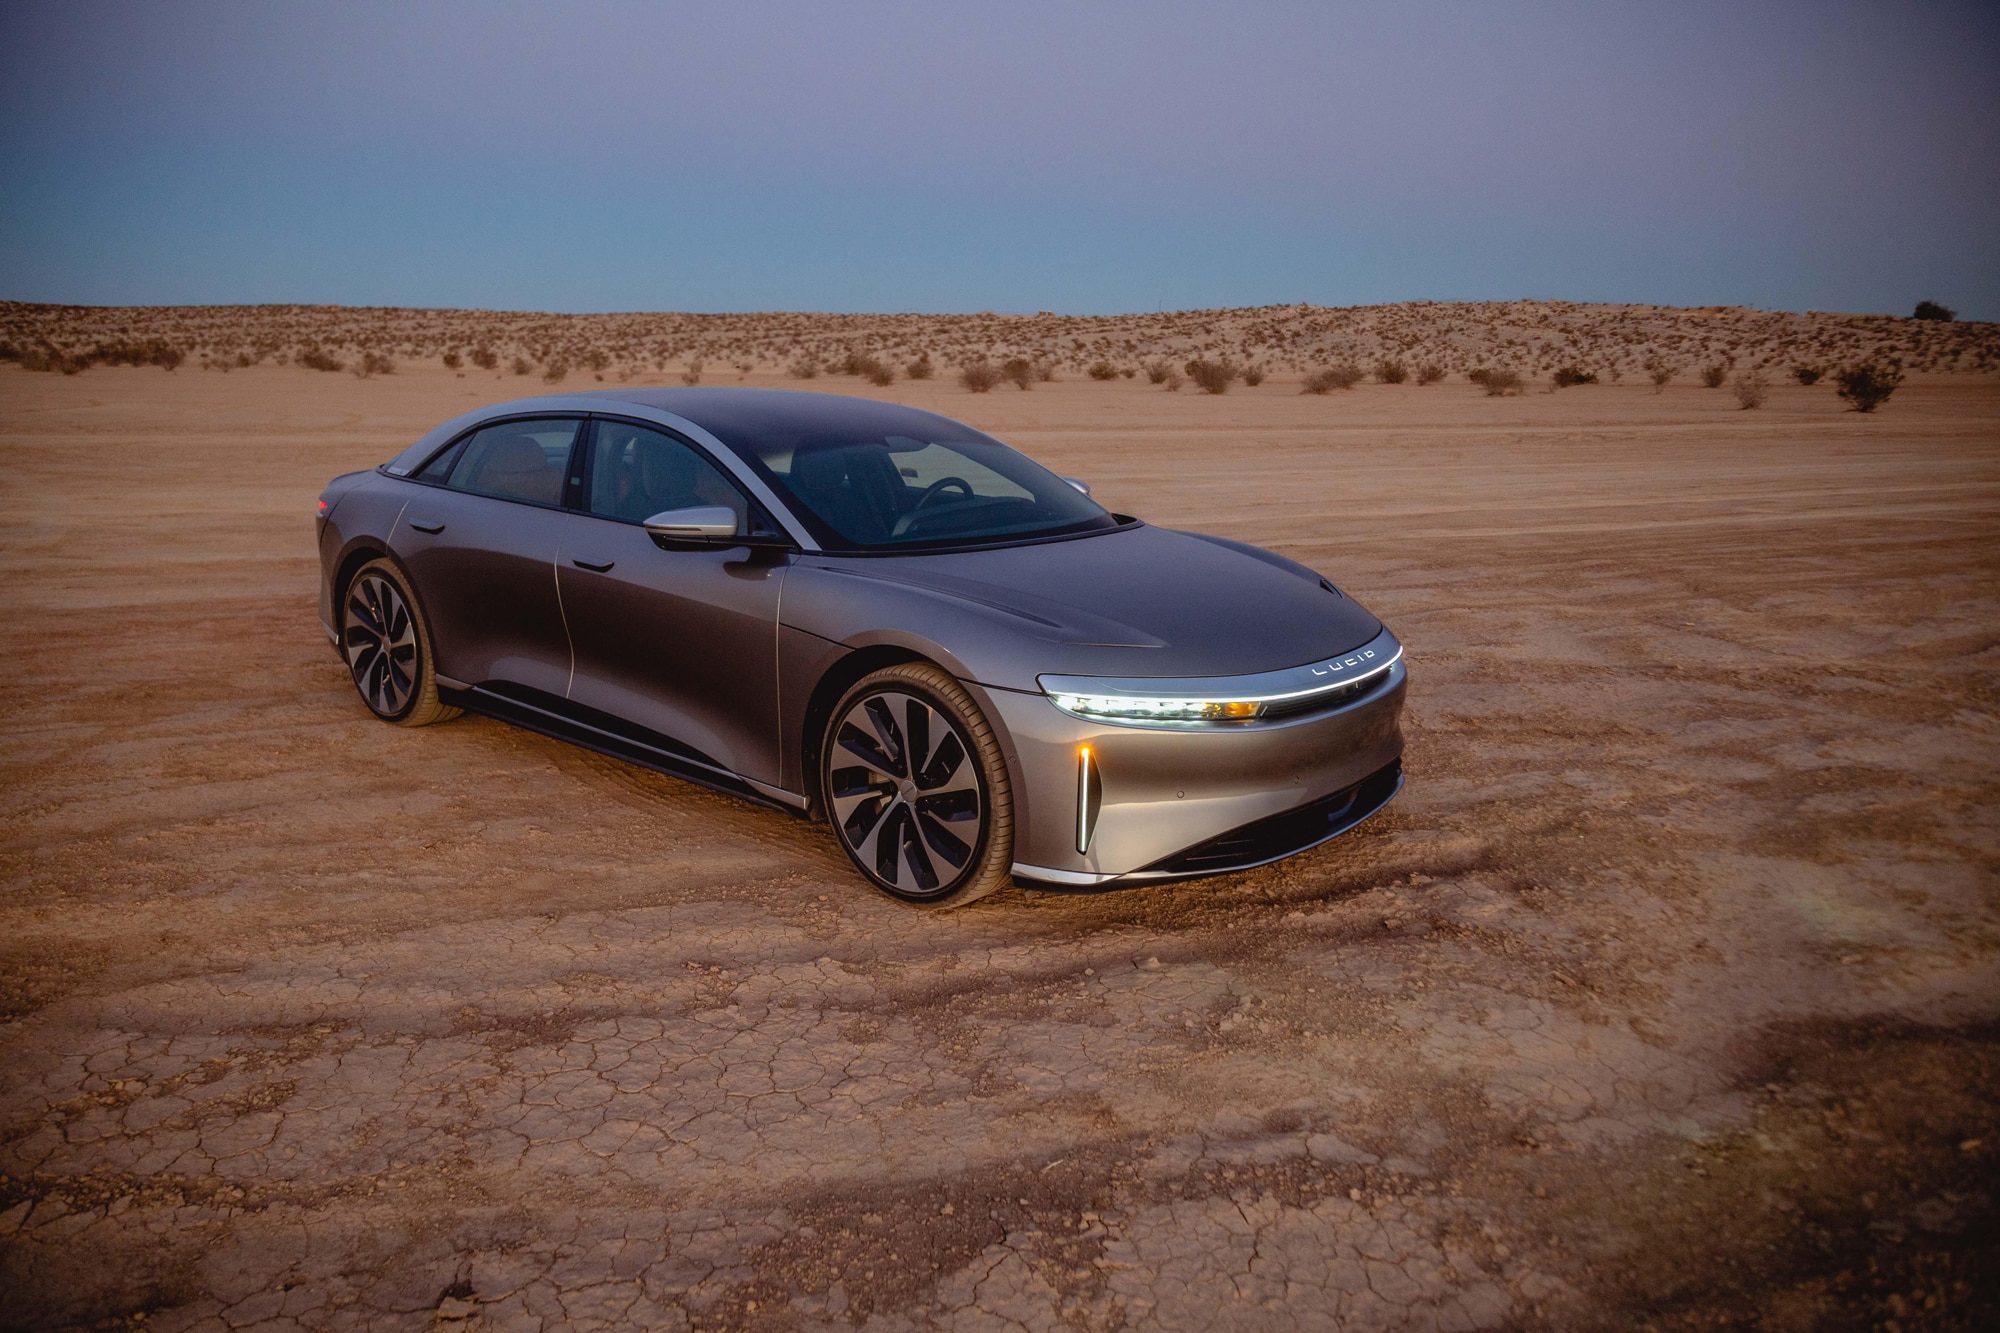 Gray 2022 Lucid Air Grand Touring parked in the Southern California high desert near Joshua Tree at sunset